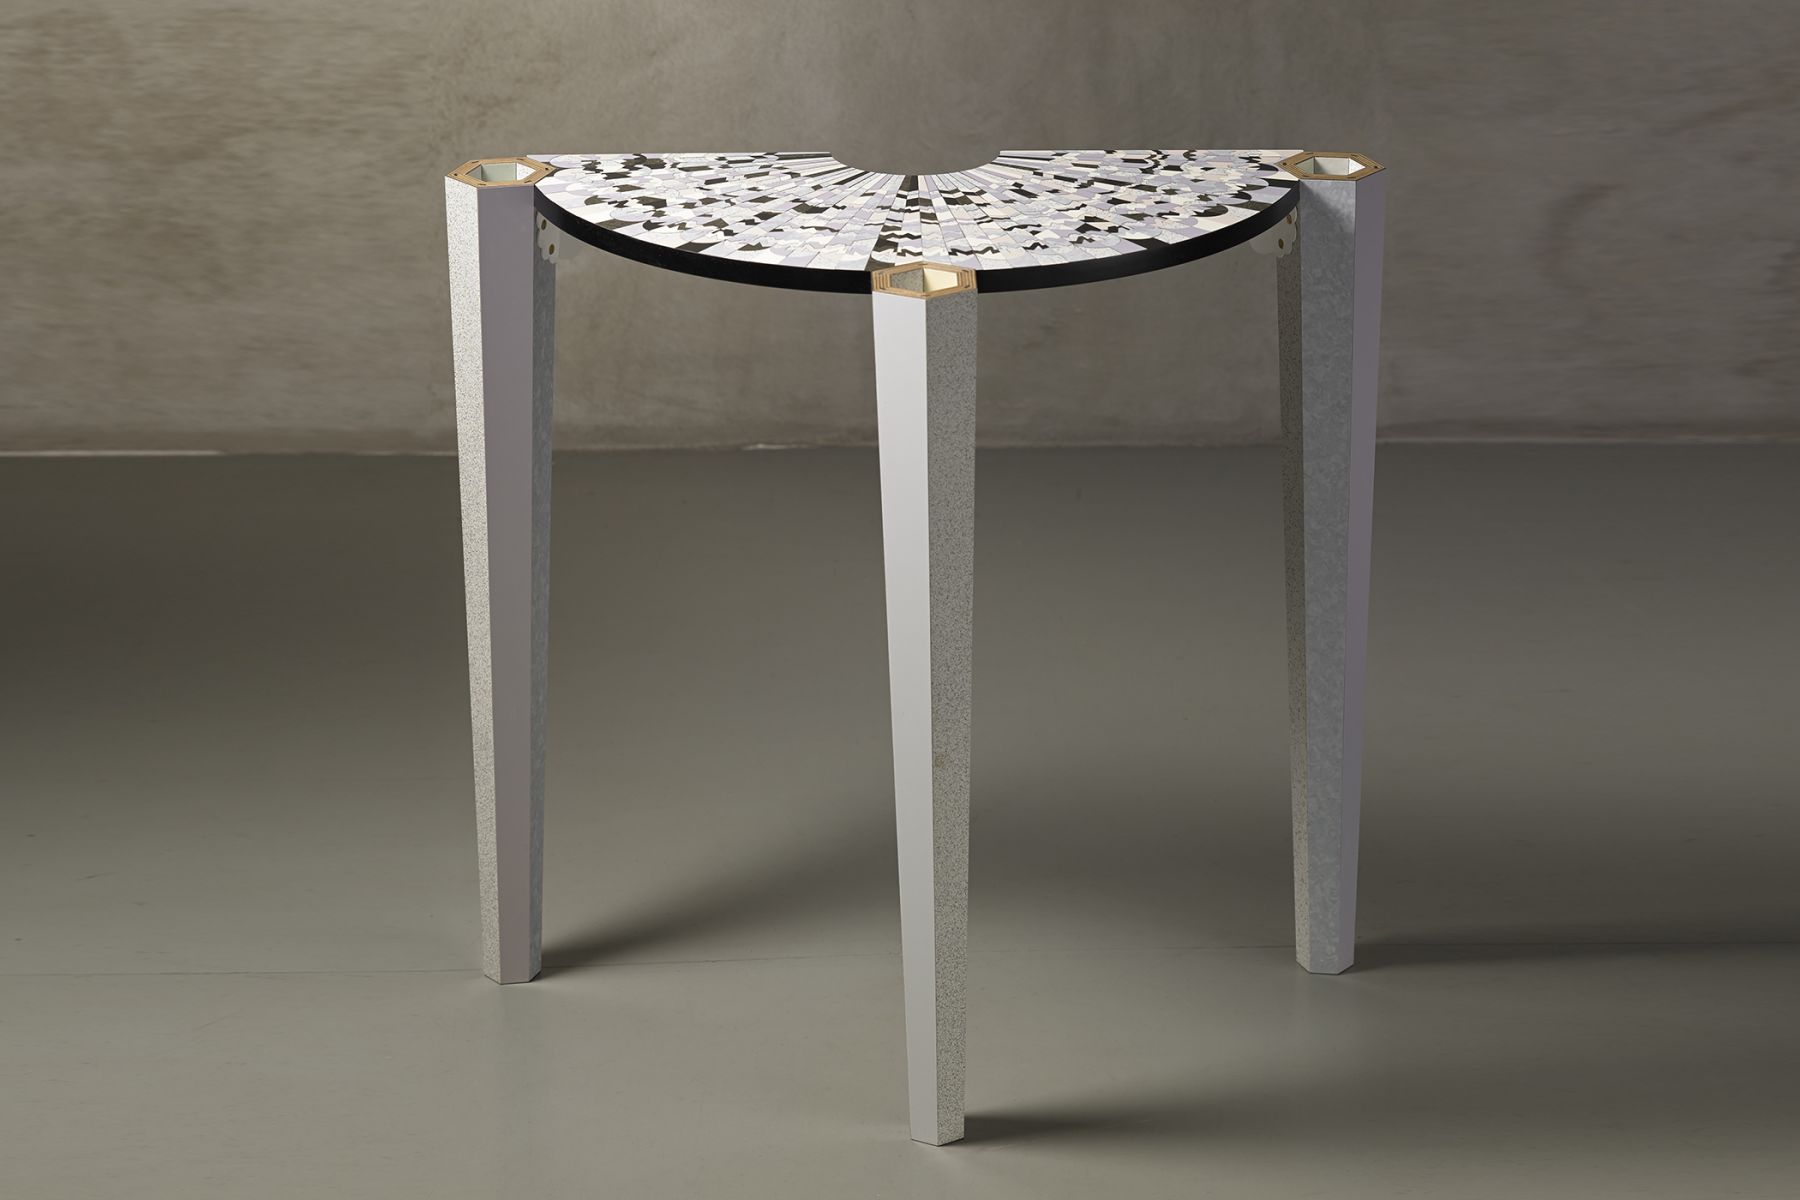 'Playtime' table - Aztec pattern Bethan Laura Wood pic-1